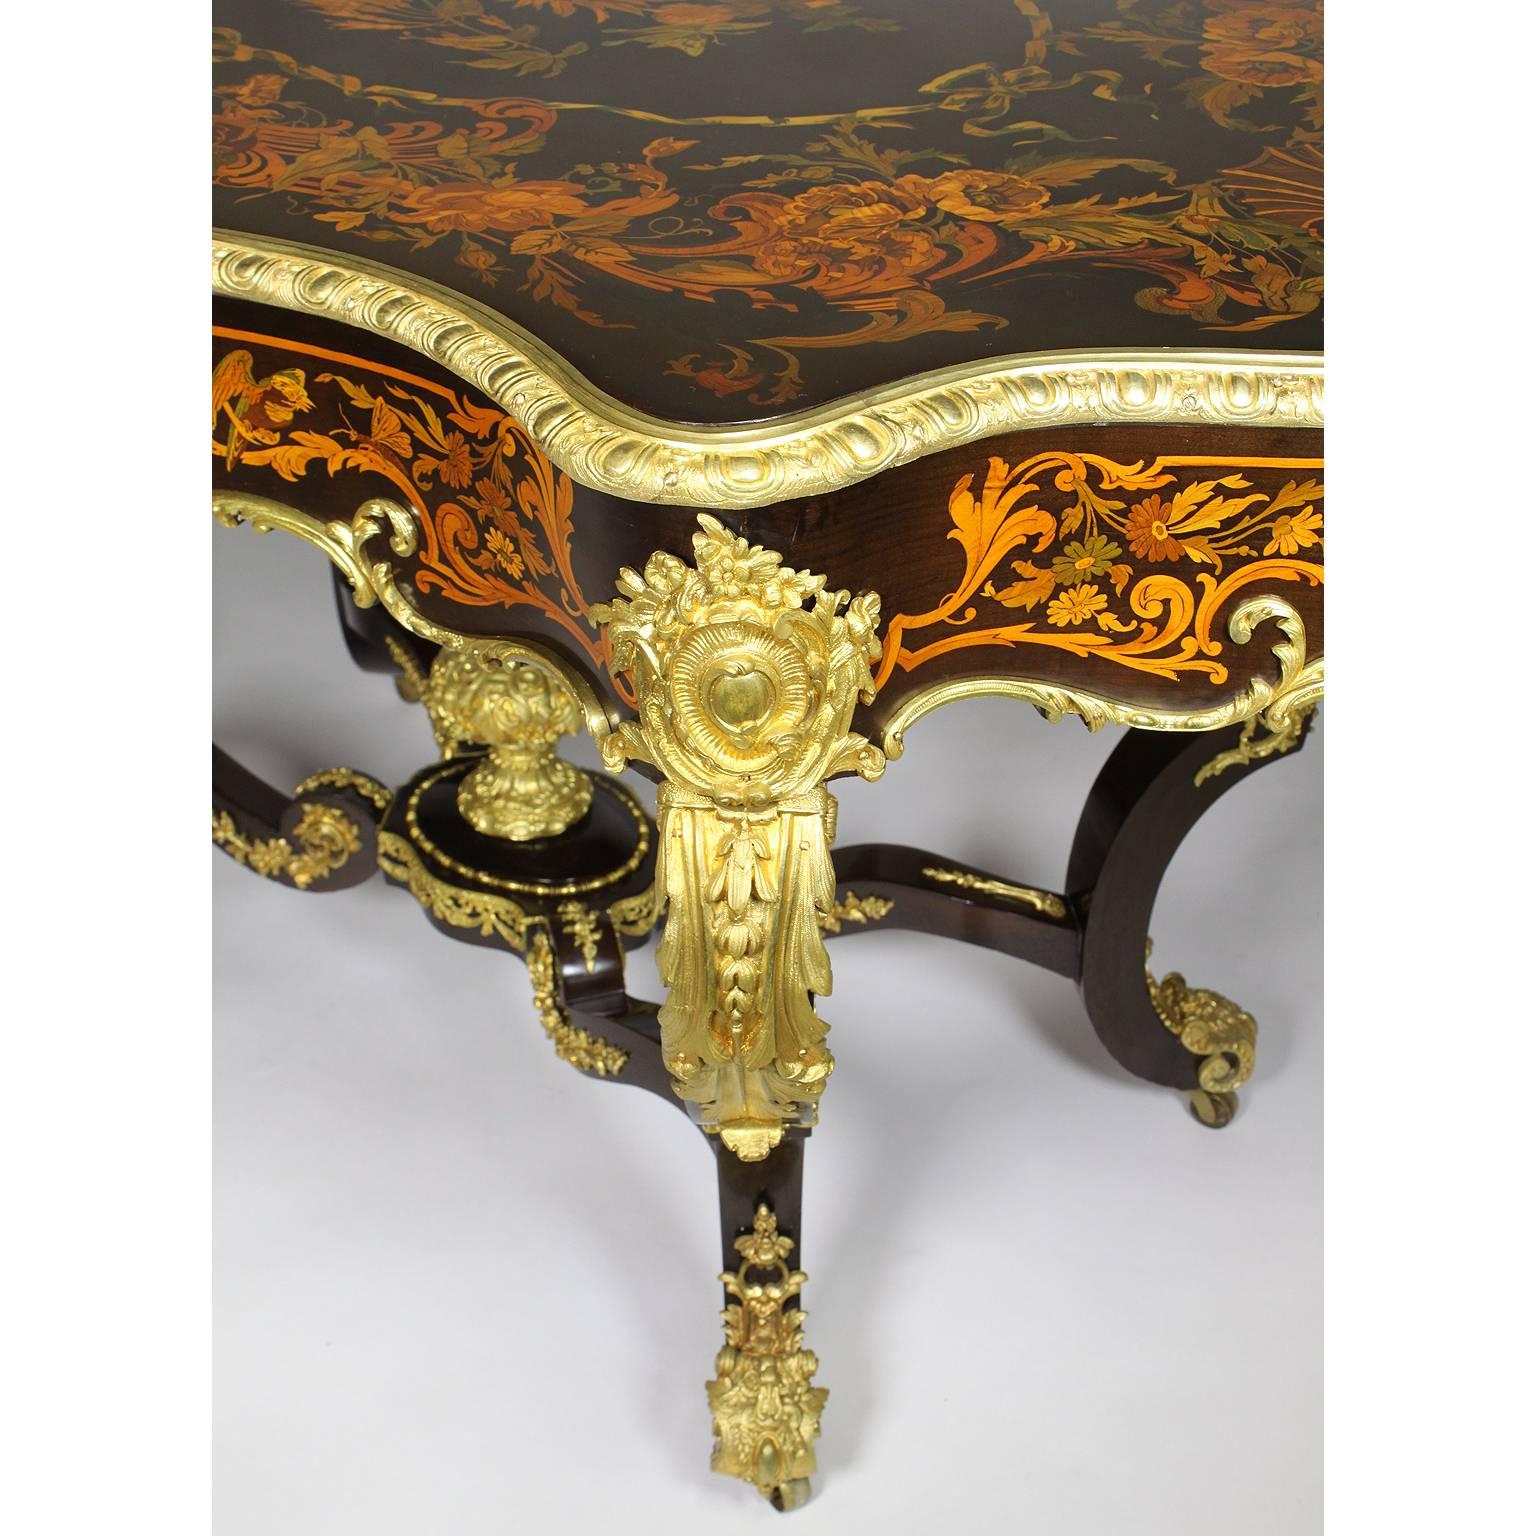 Fine Italian 19th Century Floral Marquetry and Gilt-Bronze Mounted Centre Table 4